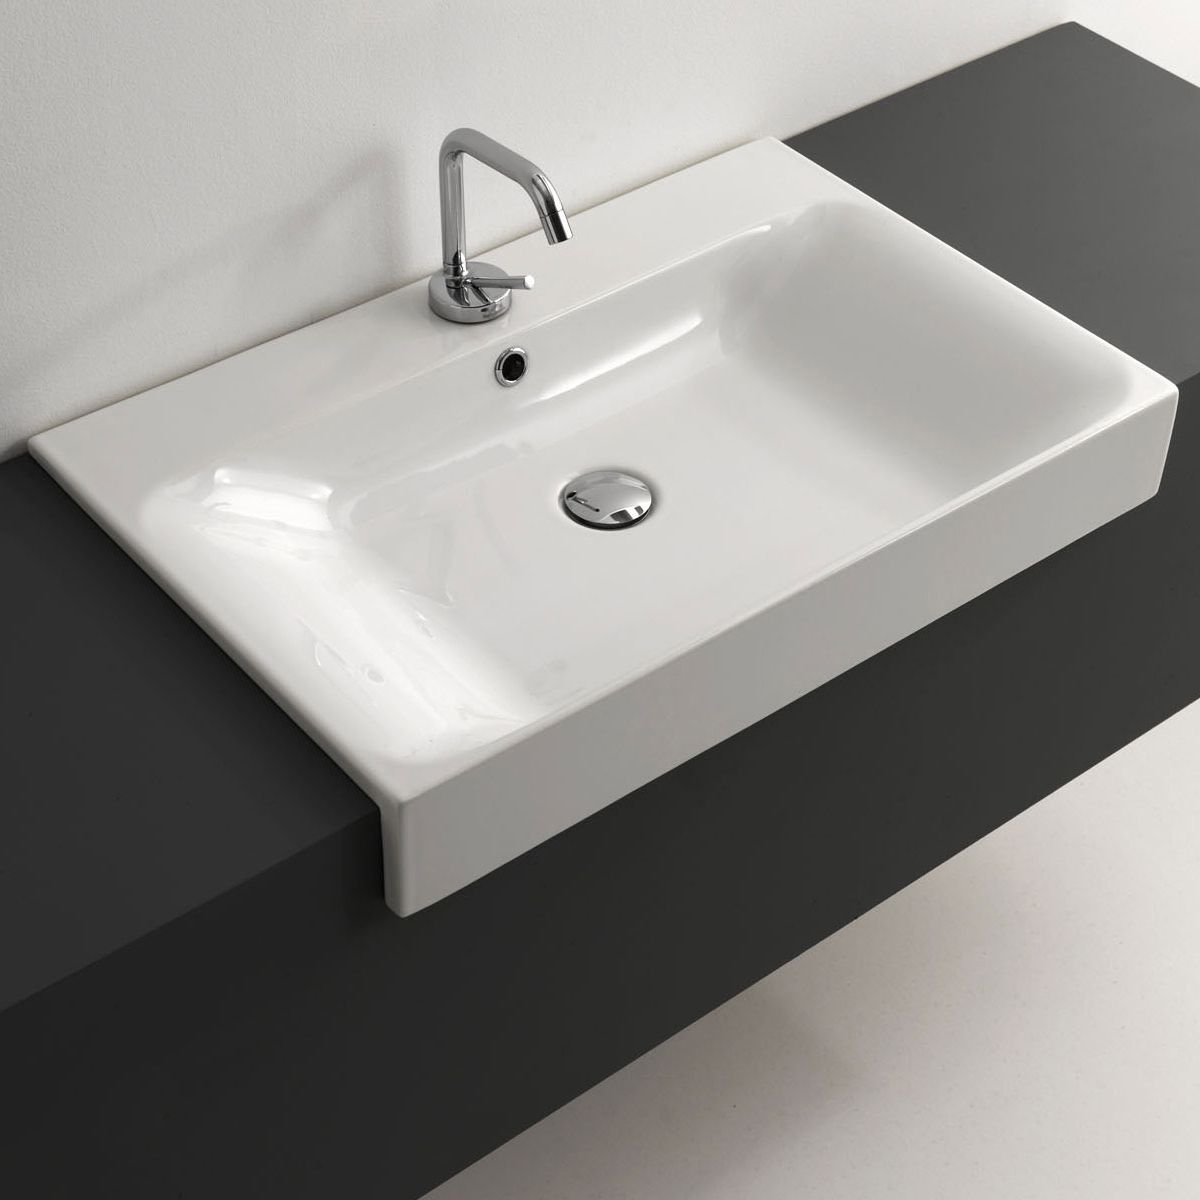 What is a Recessed Bathroom Sink? - Cento 3548